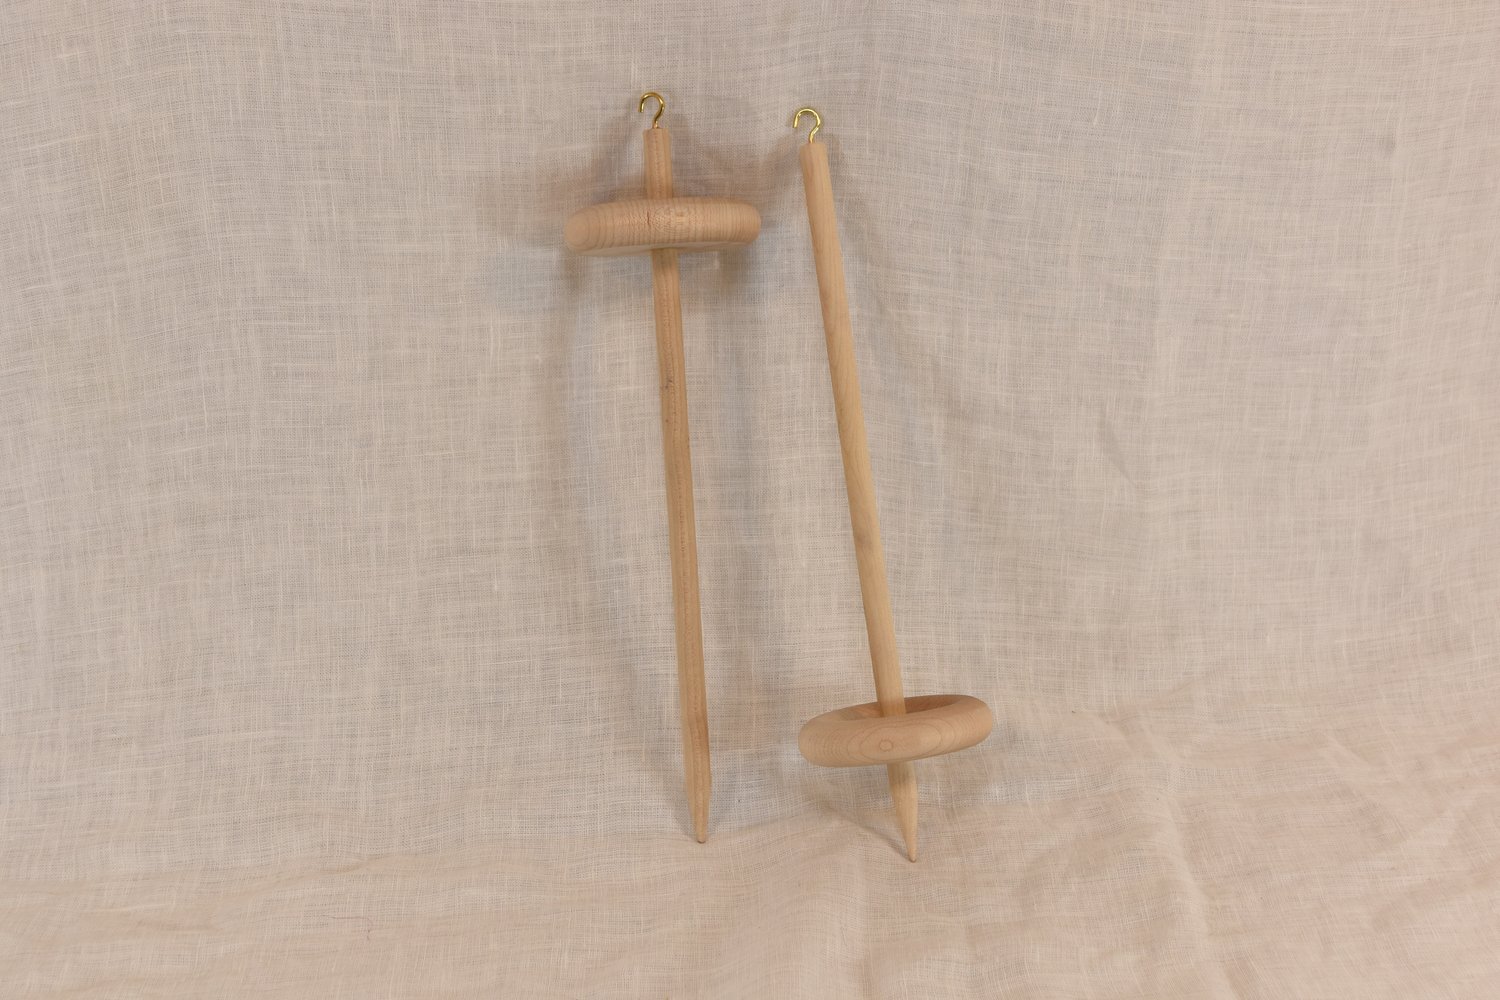 Drop Spindle Yarn Spinning Kit – Coates & Co.